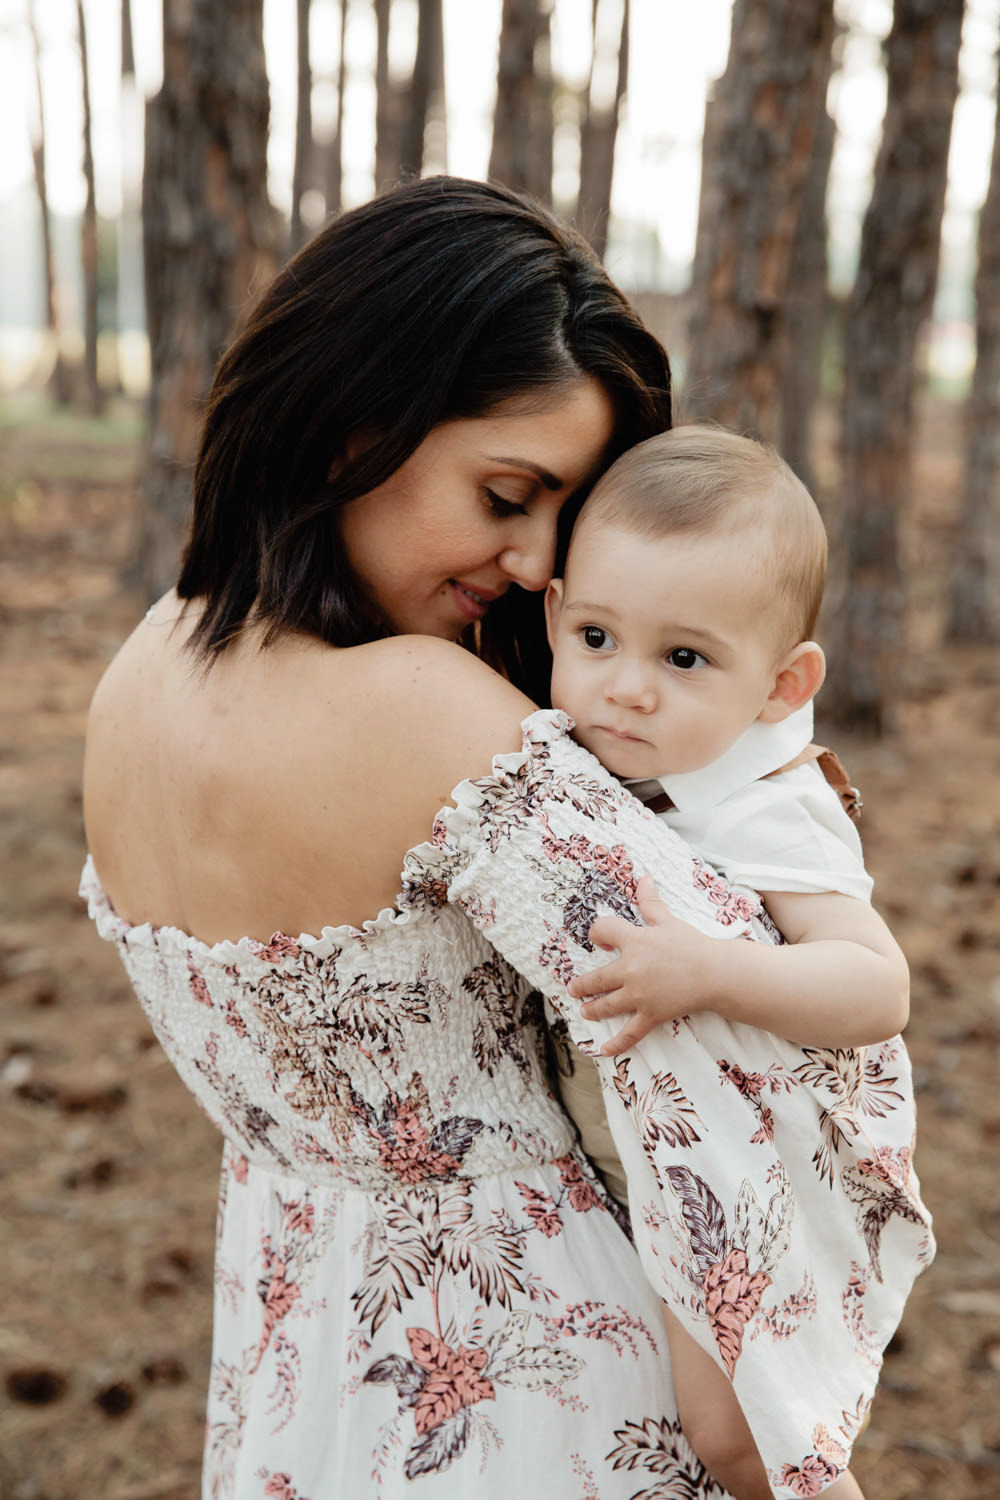 mother-and-son-in-pine-forest_Newborn_Family-Photography-Packages_Beach_Brisbane-GoldCoast-Natural